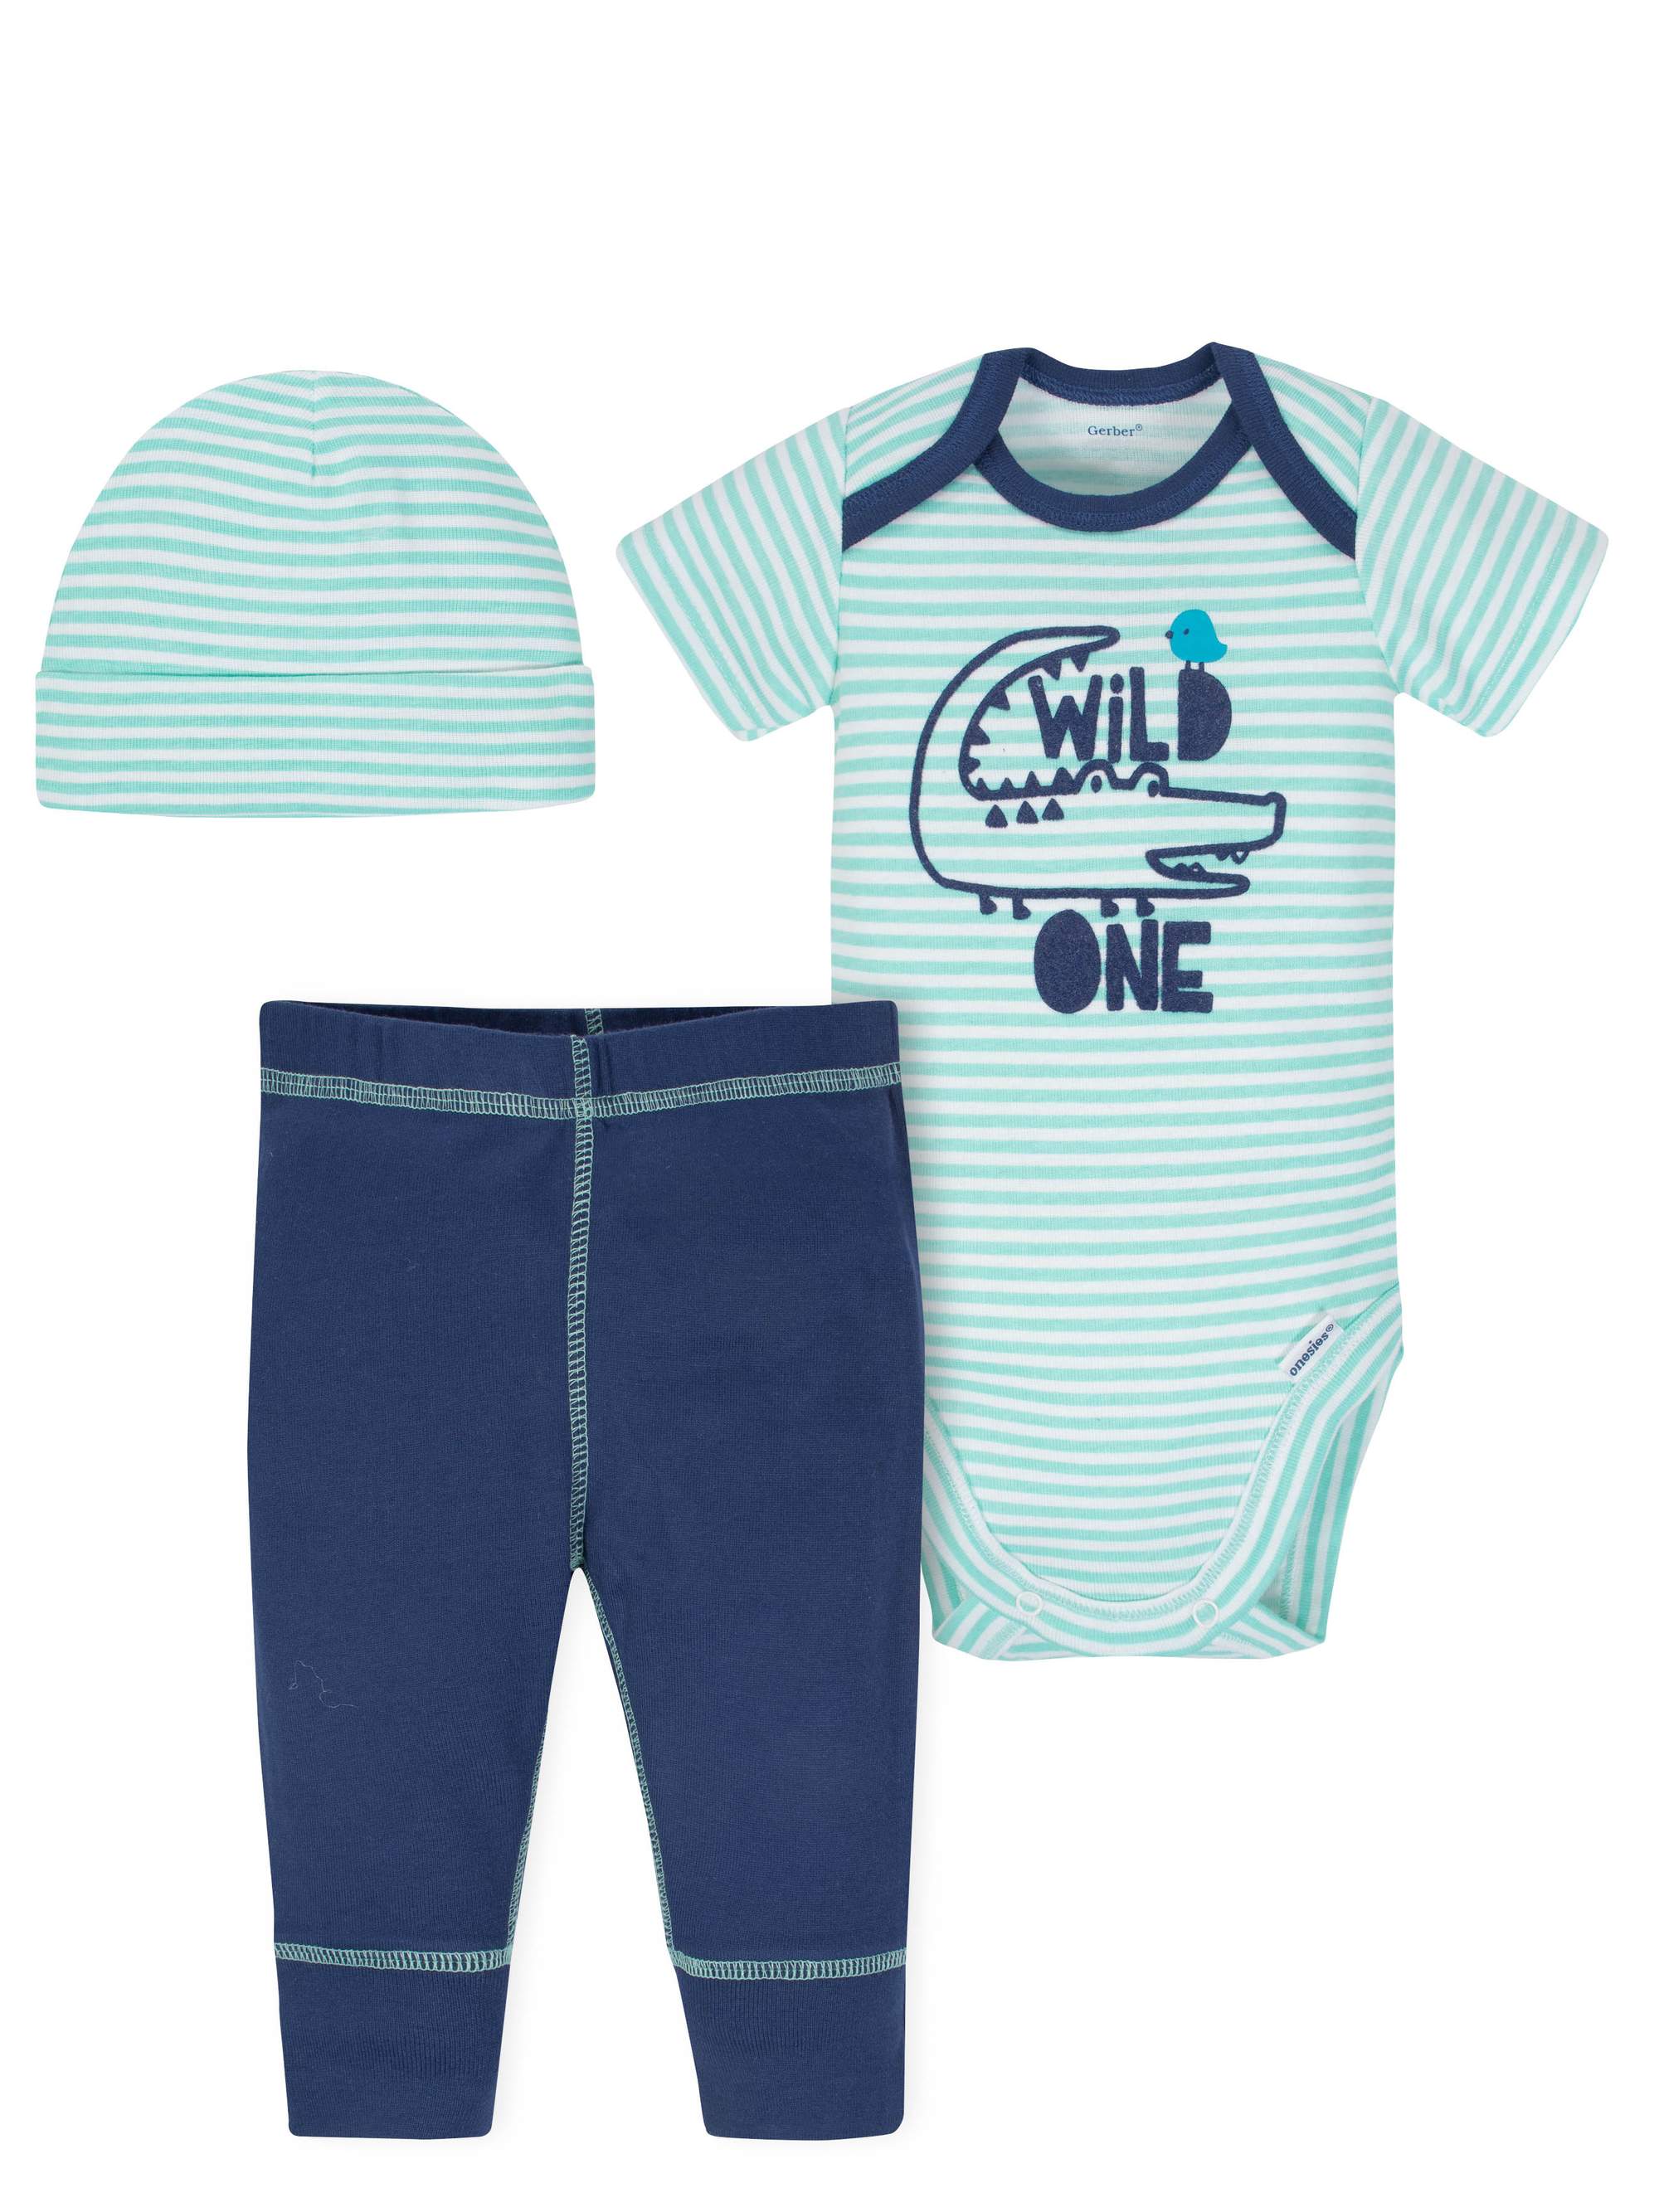 Gerber Onesies Bodysuit, Pants and Cap, 3pc Outfit Set (Baby Boys) - image 1 of 4